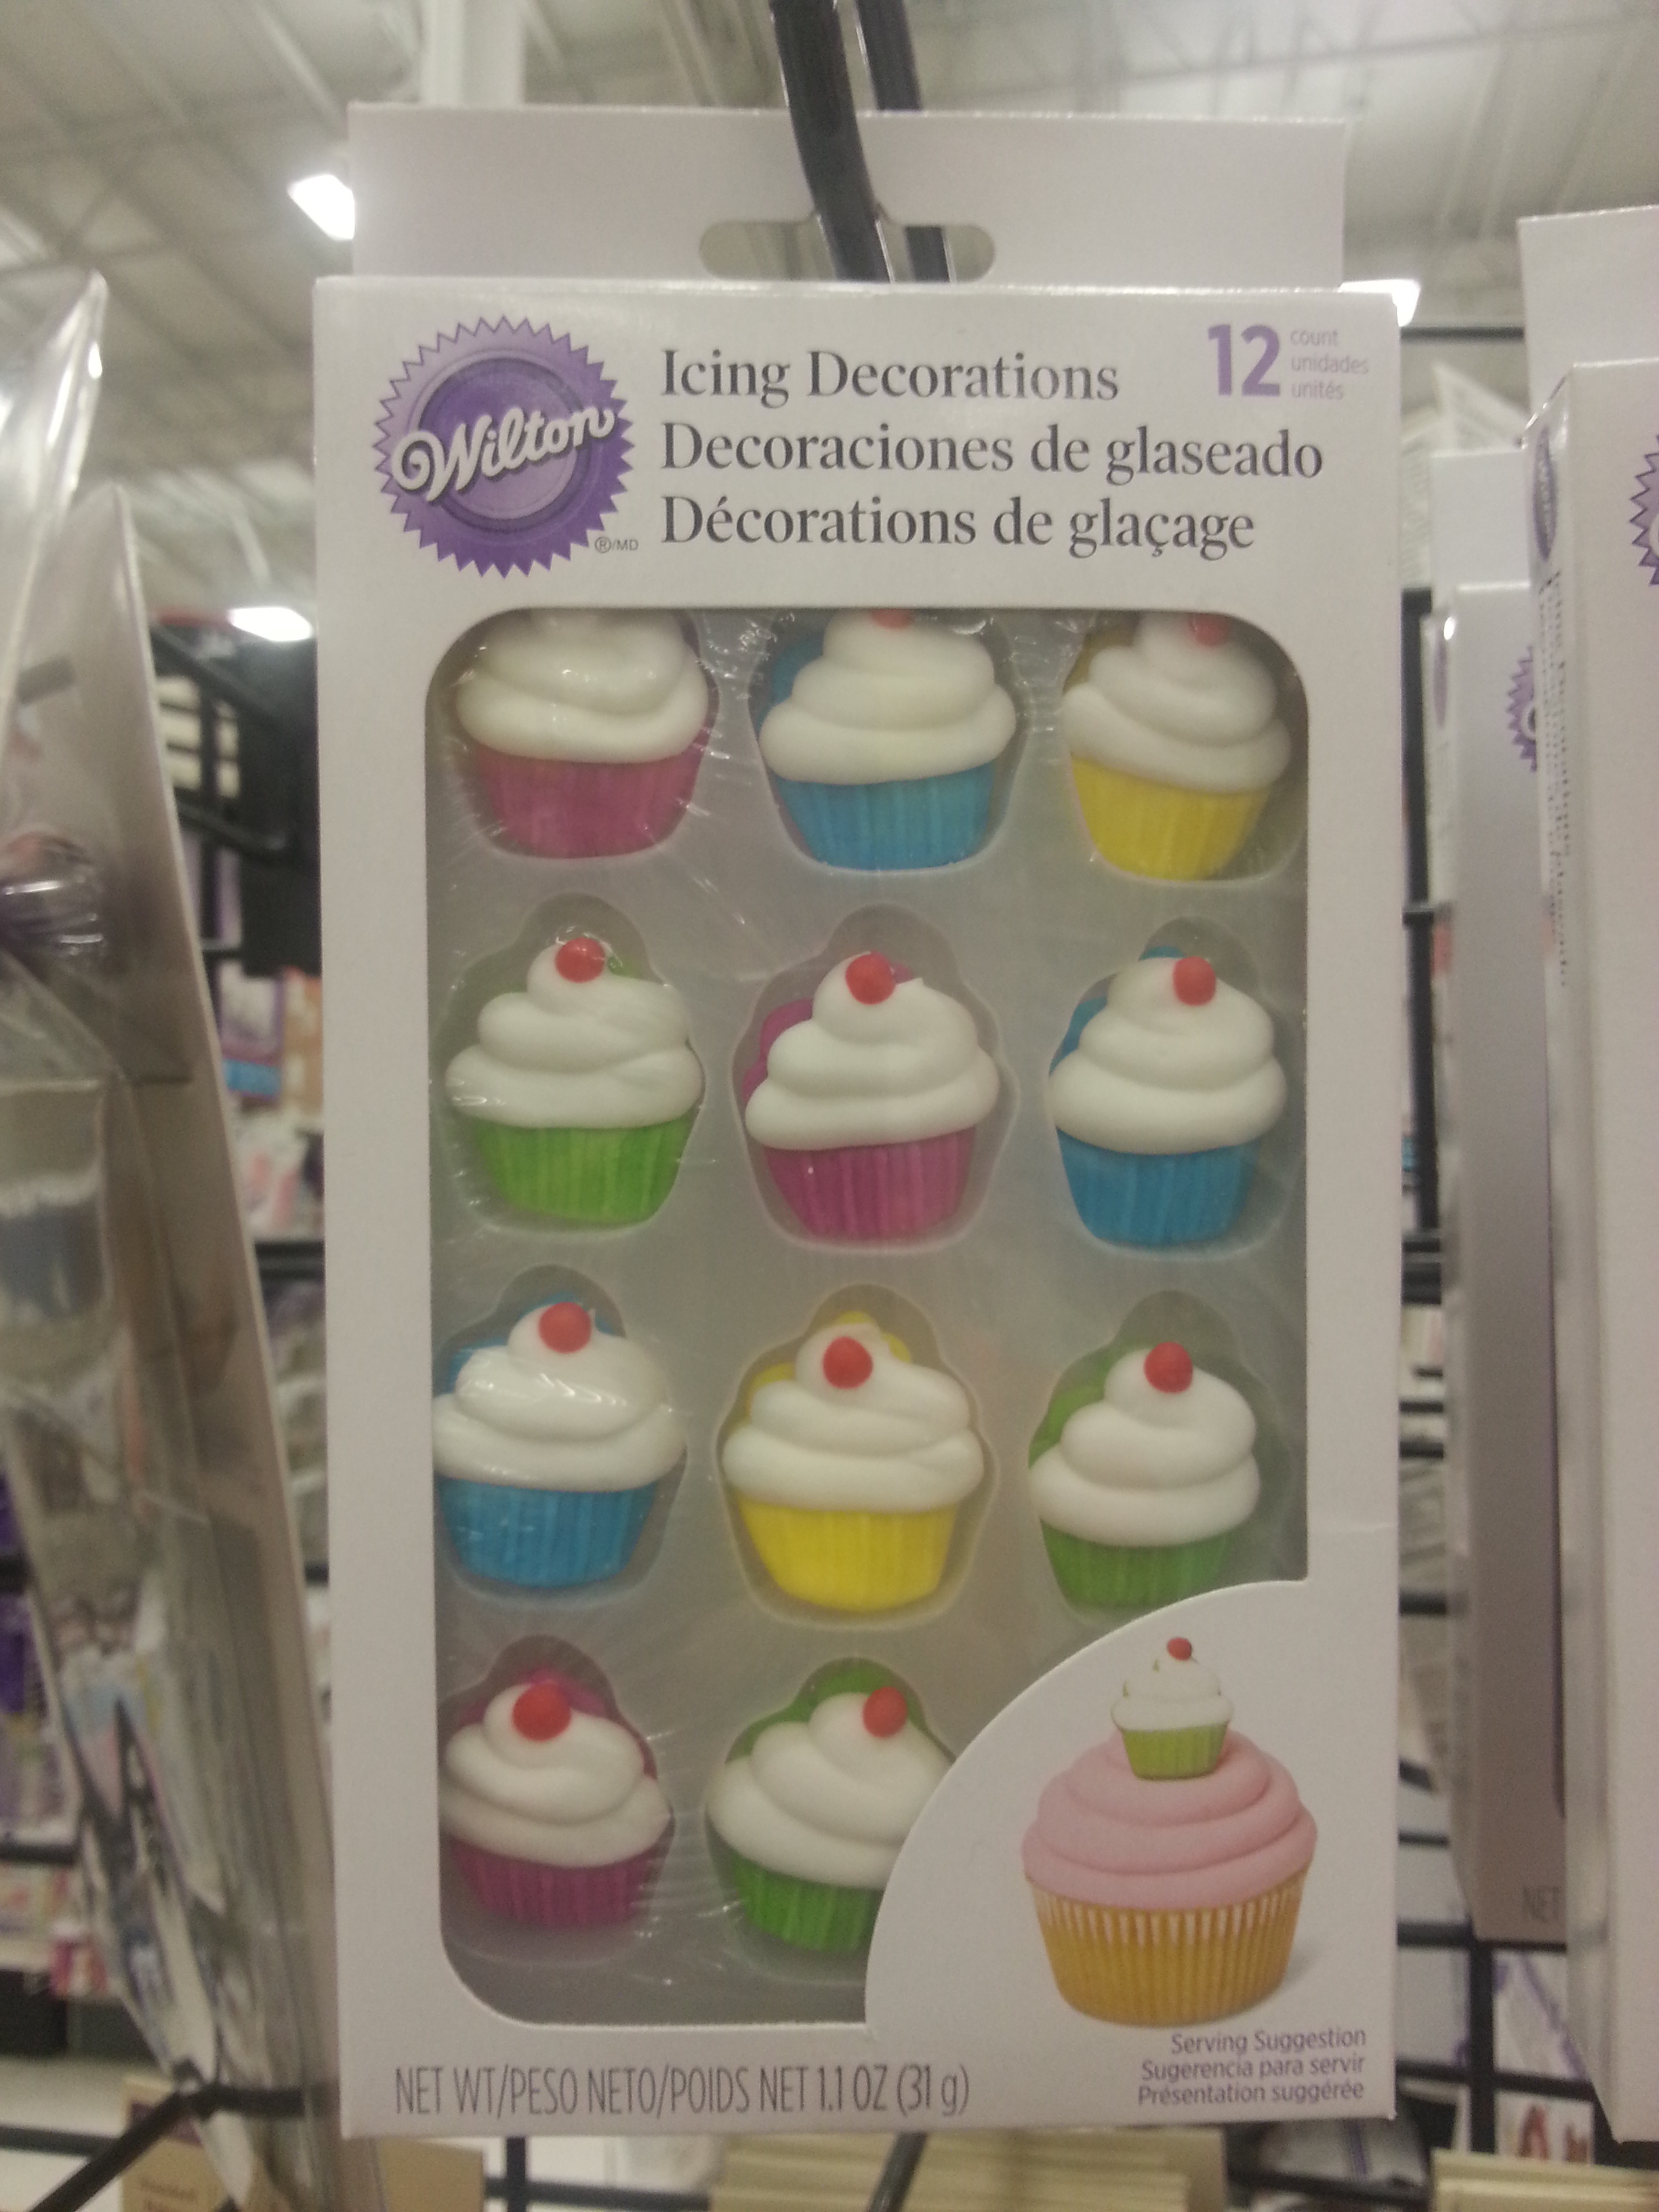 Icing Decorations - Product